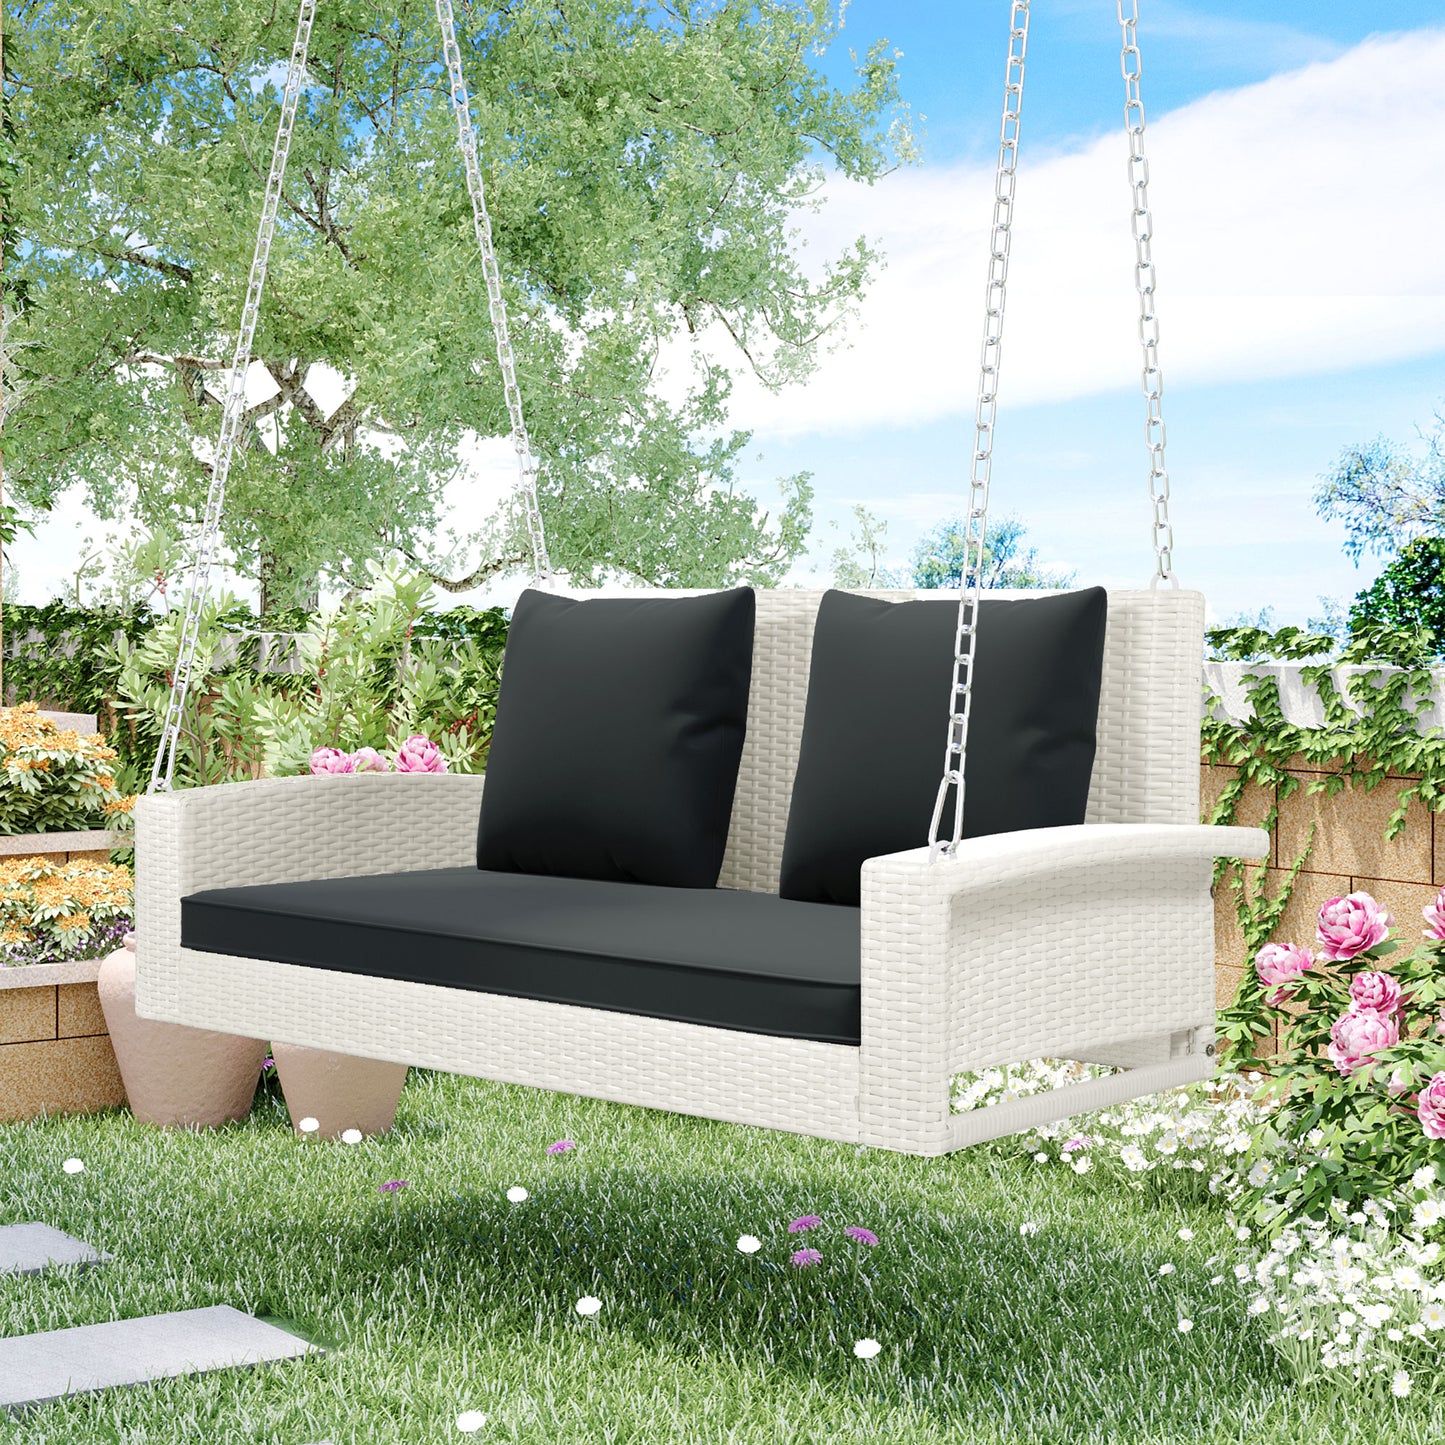 SYNGAR 2-Seat Hanging Porch Swing, Outdoor All Weather Rattan Swing Bench with Chains, Heavy Duty Hammock Bench Chair with Beige Cushions, Ideal for Backyard, Balcony, Deck, C30